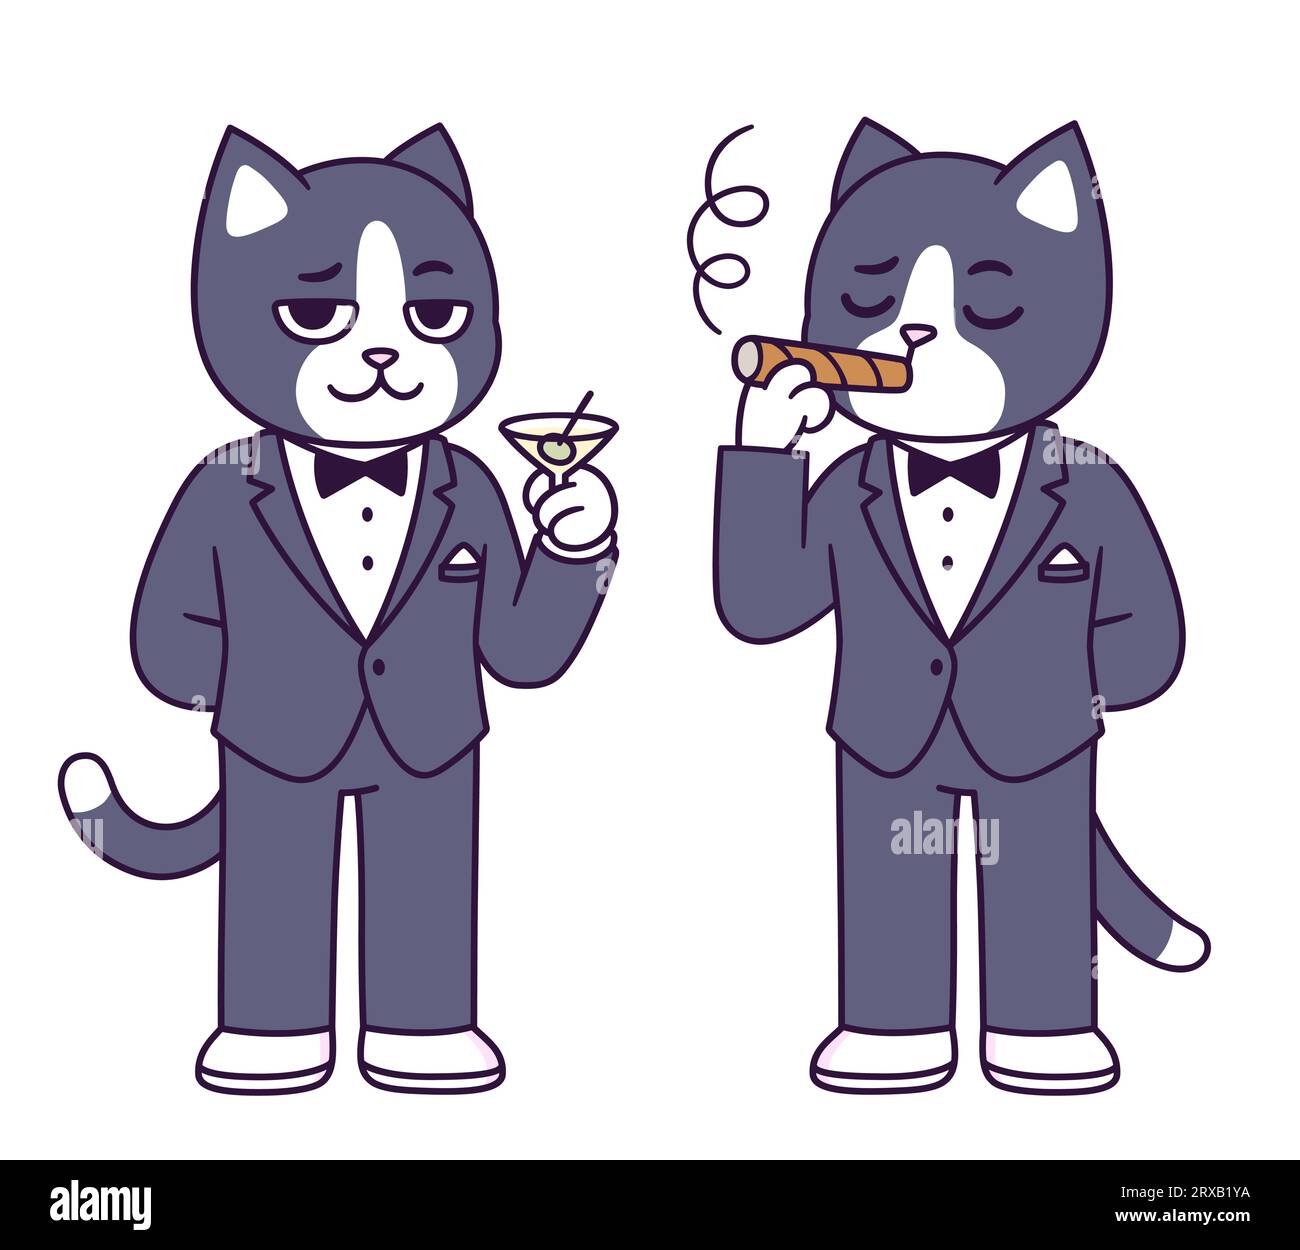 Tuxedo cat cartoon character. Funny cat in black tie suit holding martini glass and smoking cigar. Cute vector illustration. Stock Vector